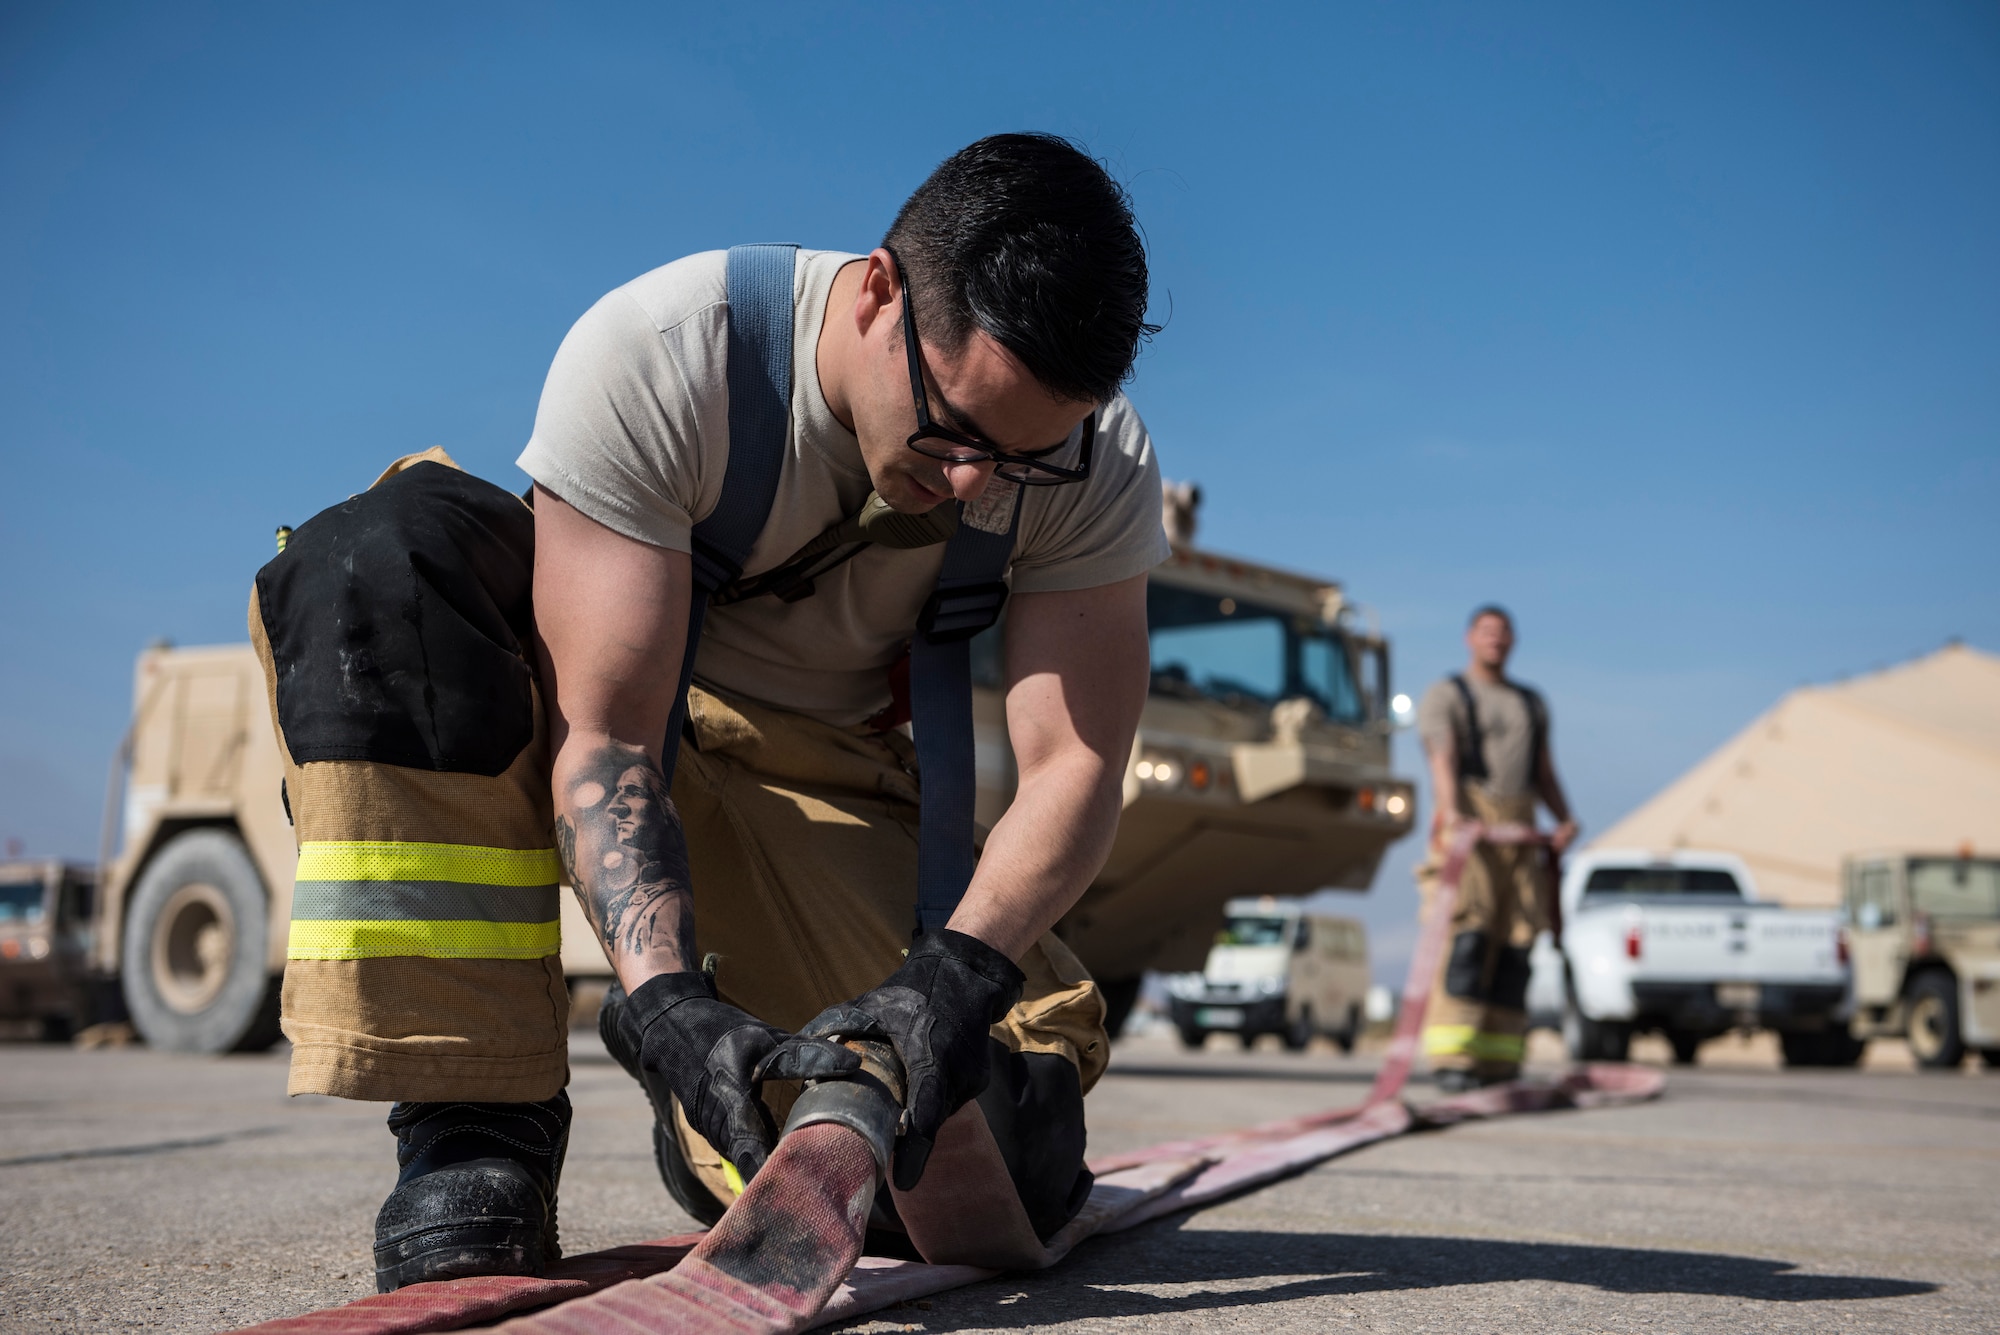 Staff Sgt. Keith Ryon, a firefighter assigned to the 332d Expeditionary Civil Engineer Squadron, prepares a hose during emergency egress training February 14, 2018 in Southwest Asia. Ryon, and the rest of the 332 CES fire protection flight, are deployed from the Kentucky Air National Guard. (U.S. Air Force photo by Staff Sgt. Joshua Kleinholz)